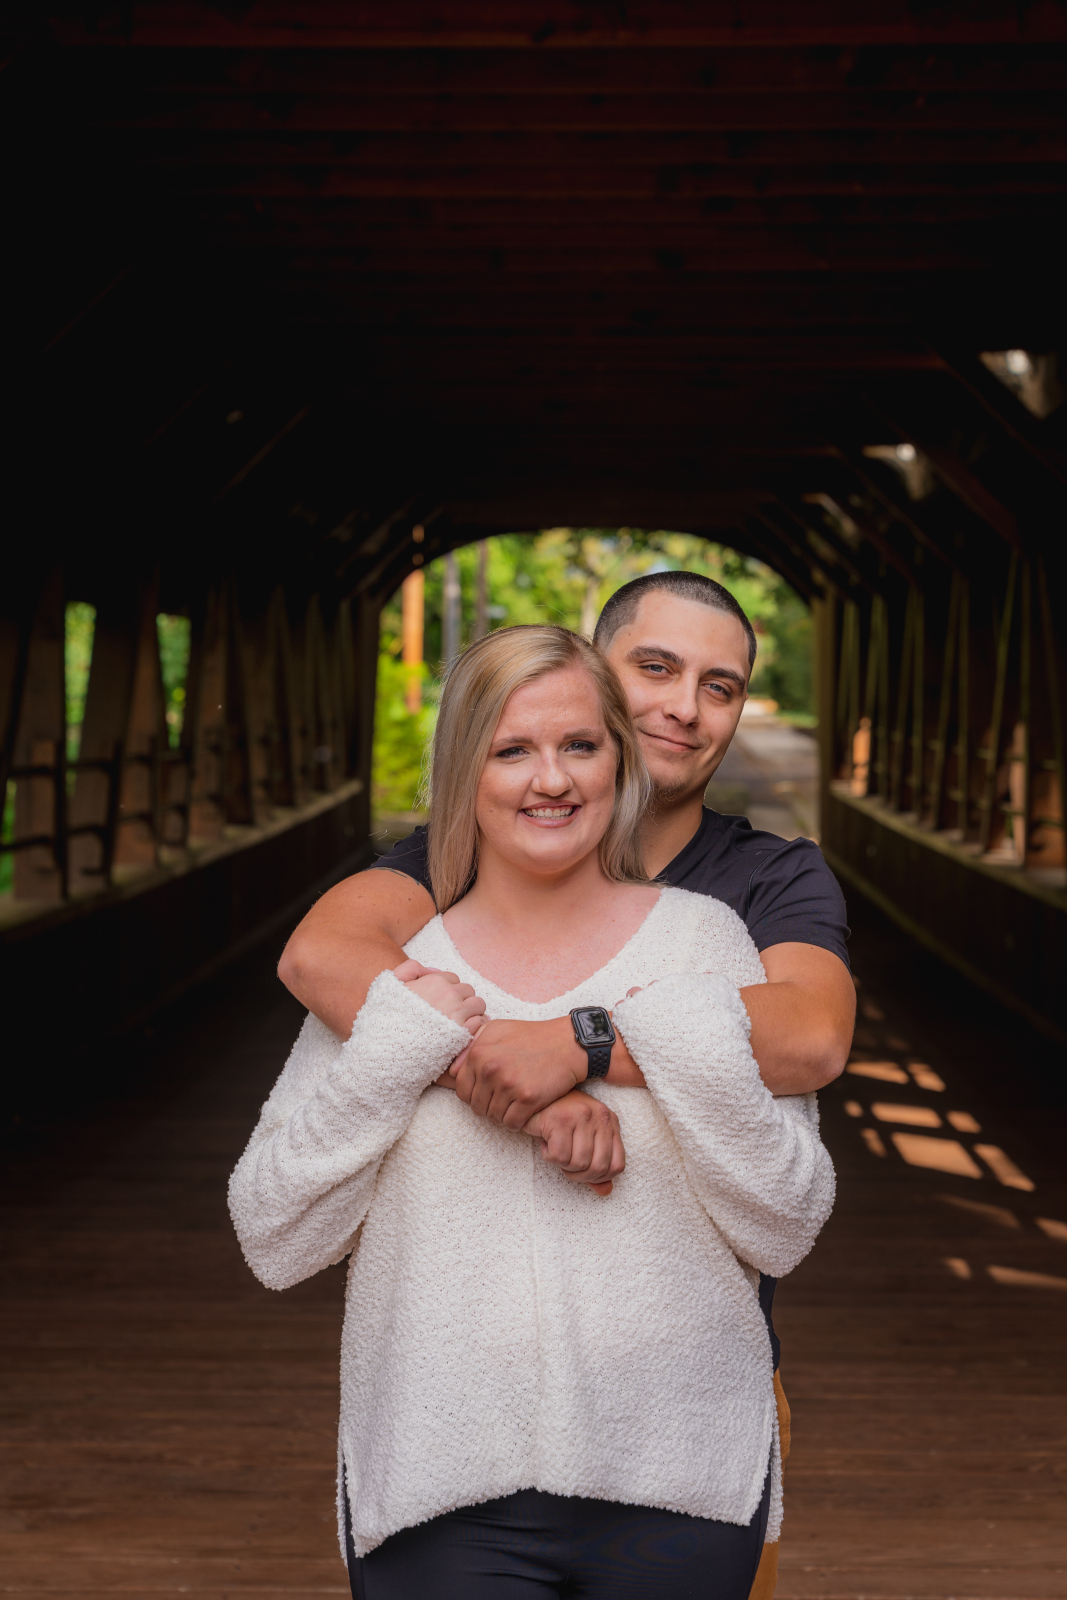 Man and woman fiancee engagement photo, couple portrait, smile, covered bridge, nature, outdoor fall engagement photo session at Grand Pacific Junction Historic Shopping District